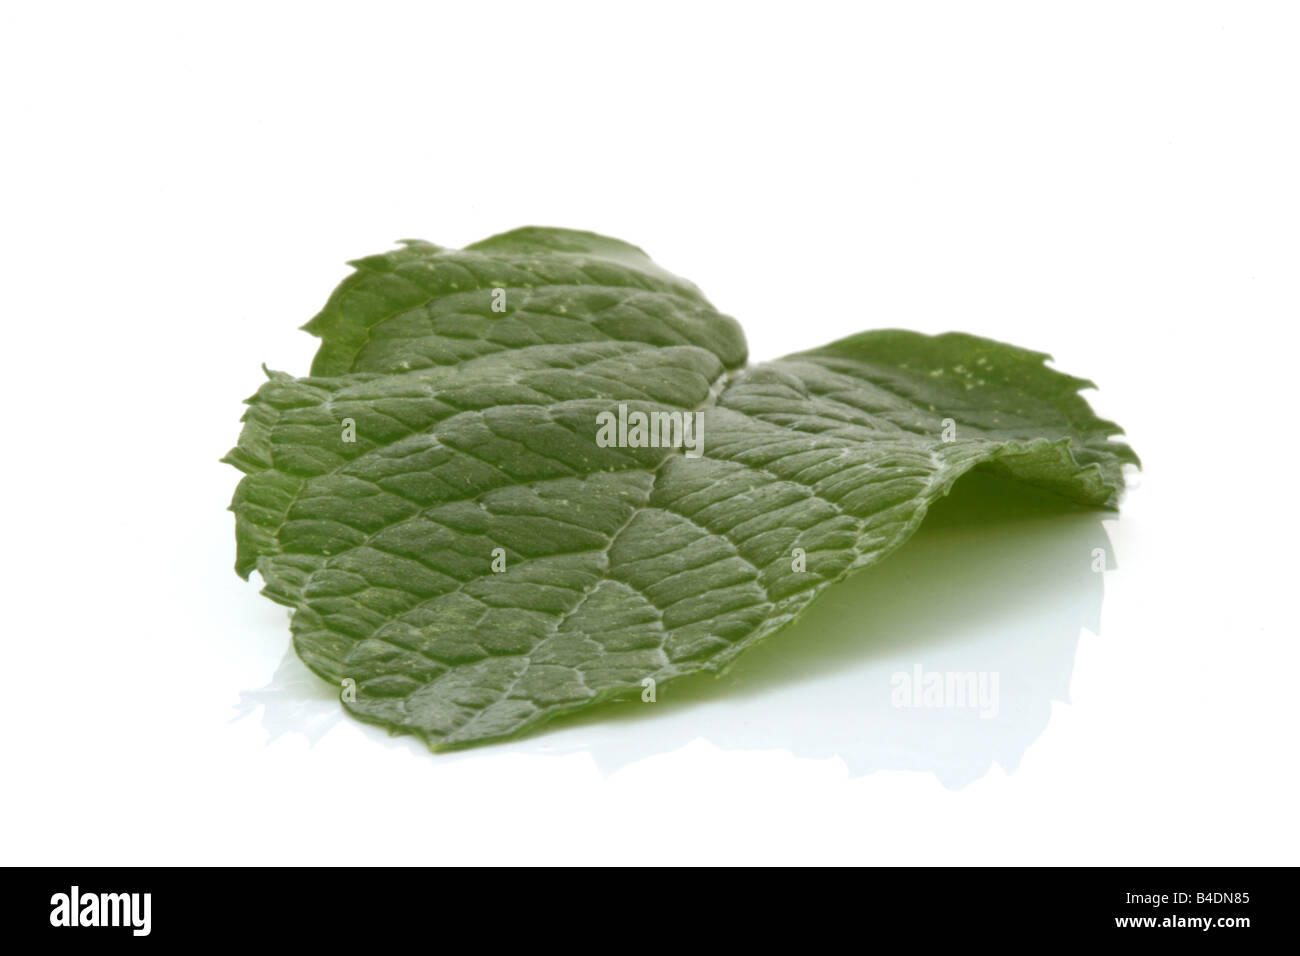 one spearmint leaf closeup isolated with reflection Stock Photo